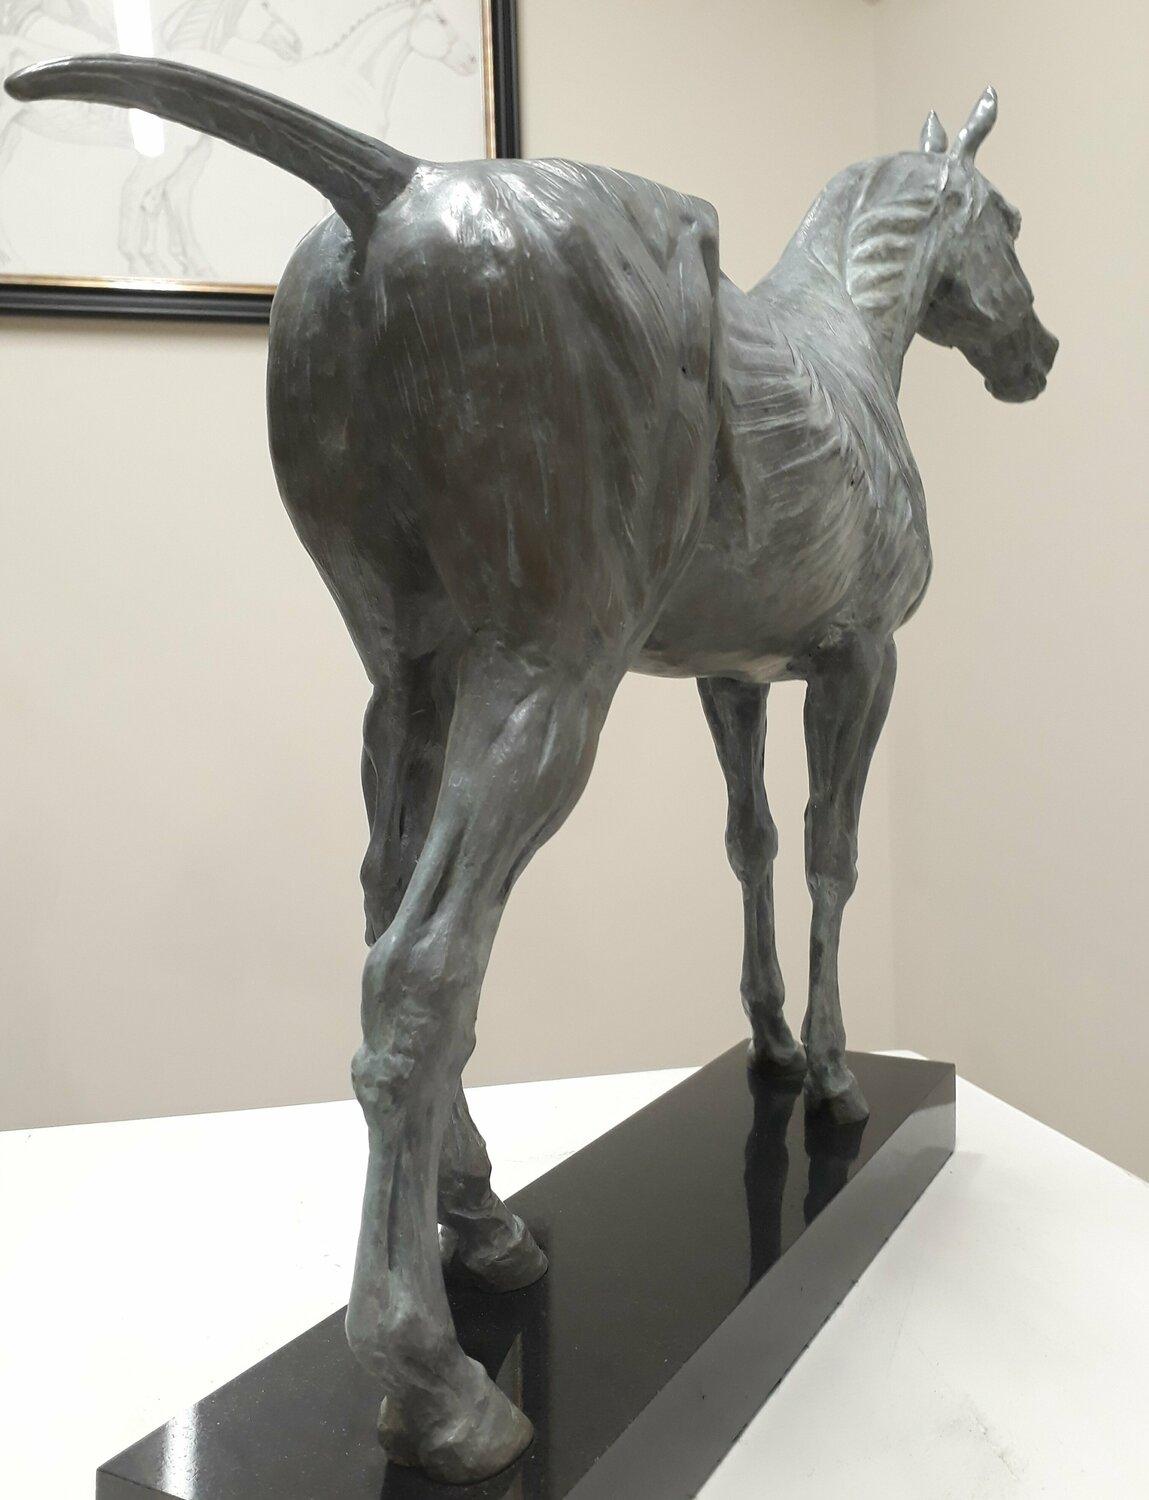 Anatomical Study of the Horse - Gold Figurative Sculpture by Barry Davies